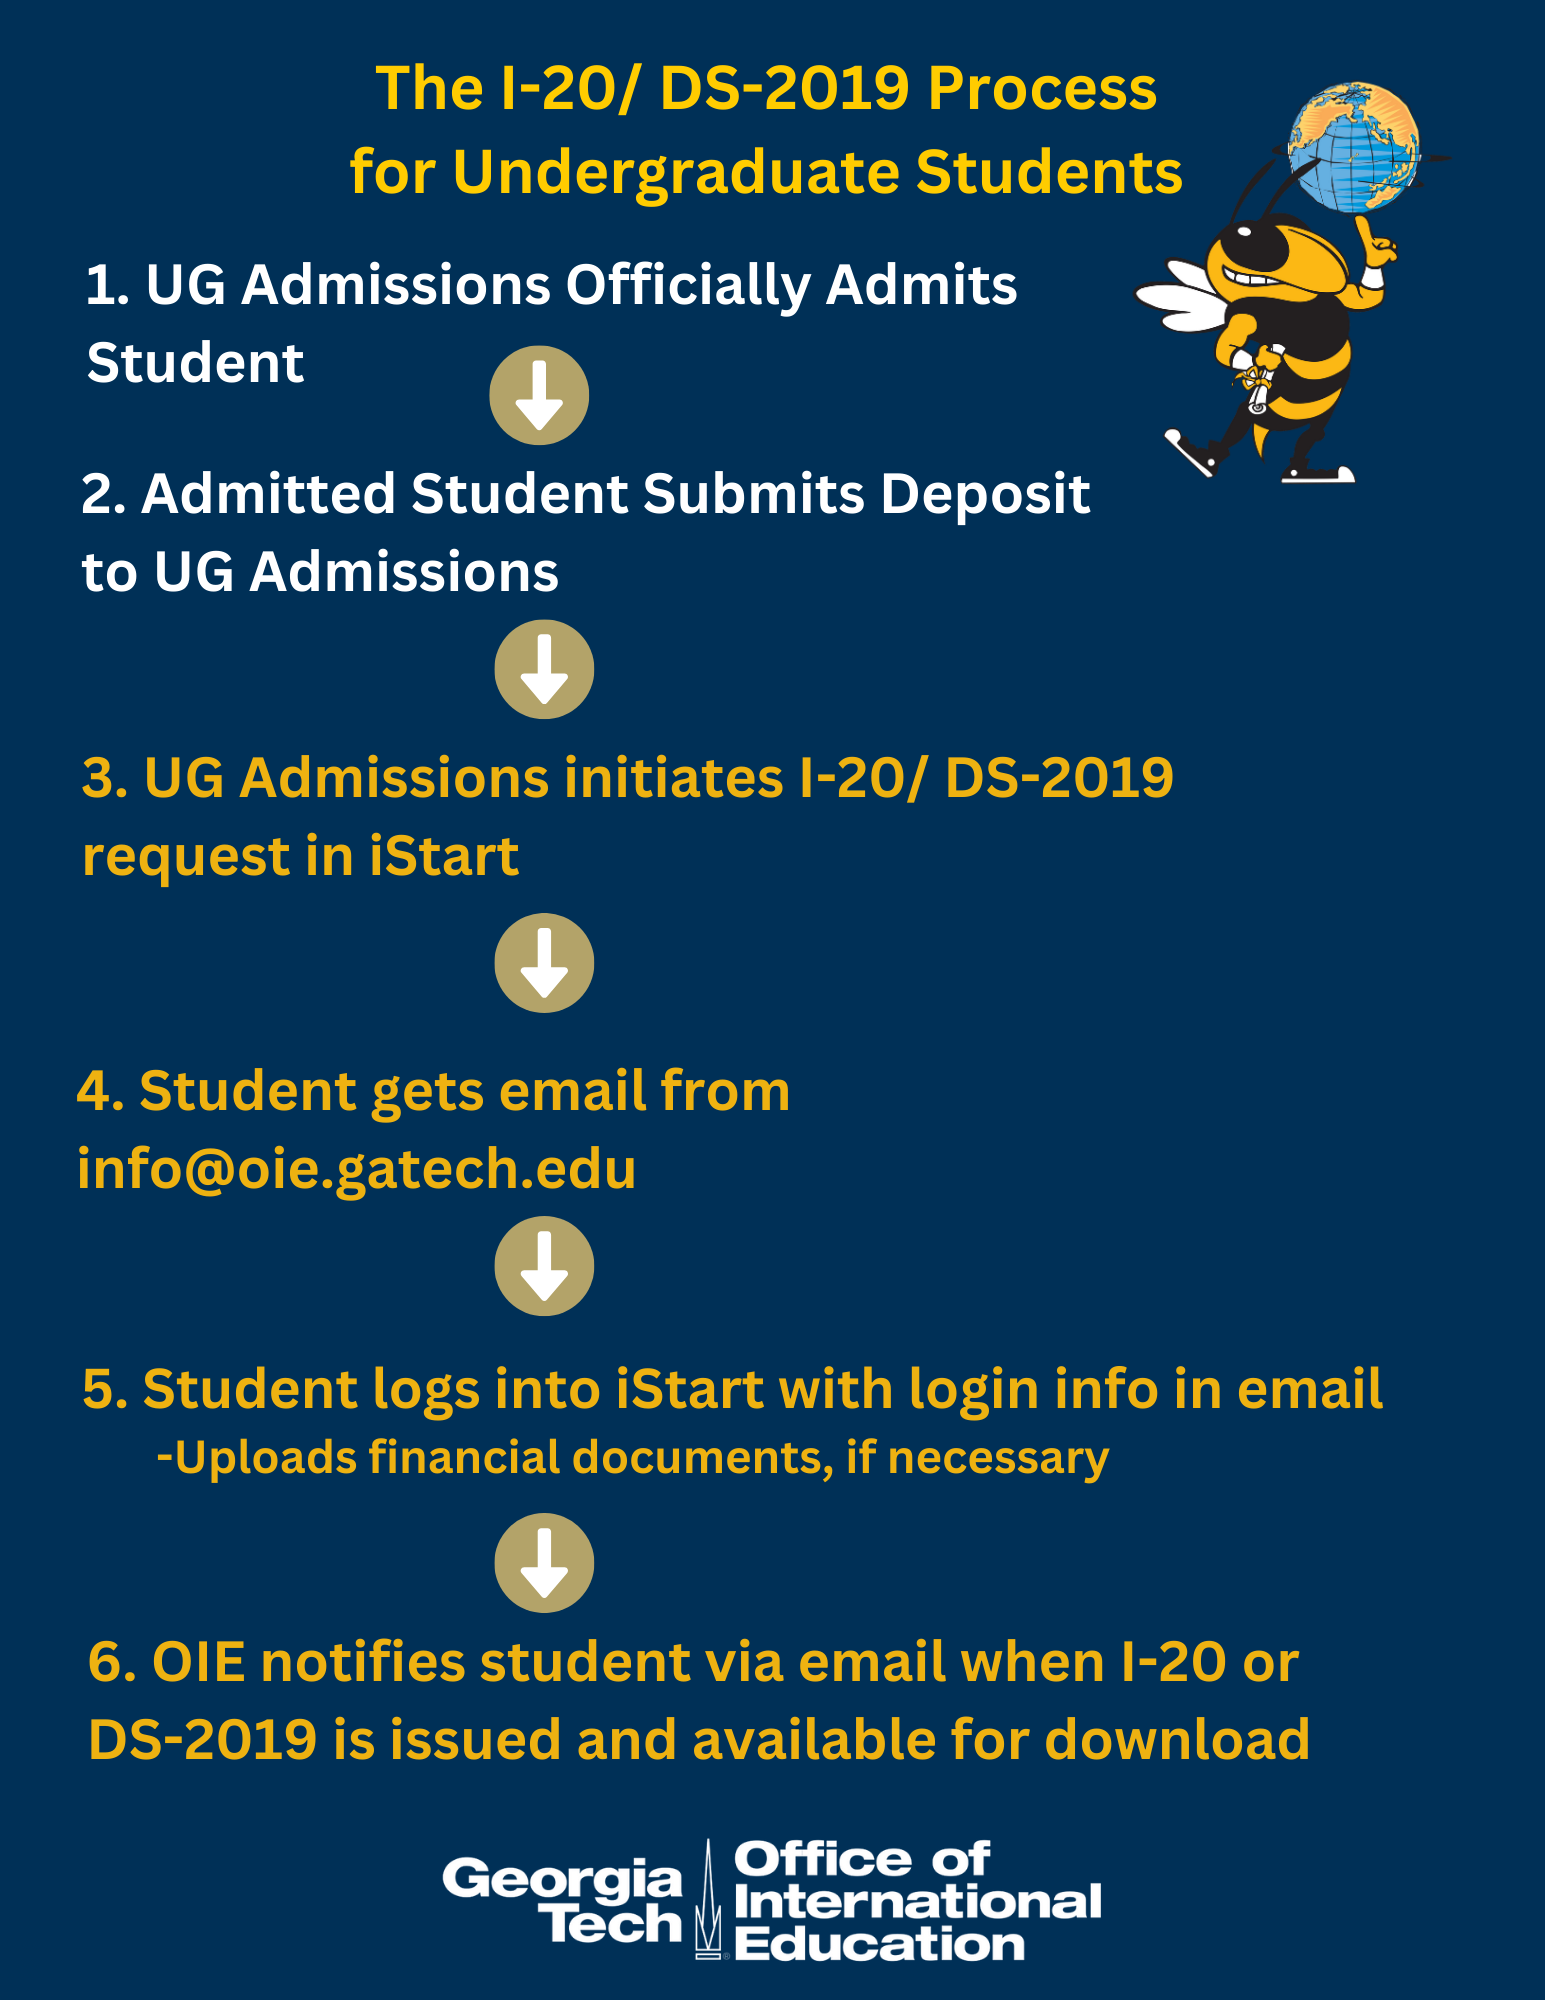 1. UG Admissions Officially Admits Student 2. Admitted Student Submits Deposit to UG Admissions 3. UG Admissions initiates I-20/ DS-2019 request in iStart 4. Student gets email from info@oie.gatech.edu 5. Student logs into iStart with login info in email -Uploads financial documents, if necessary 6. OlE notifies student via email when 1-20 or DS-2019 is issued and available for download